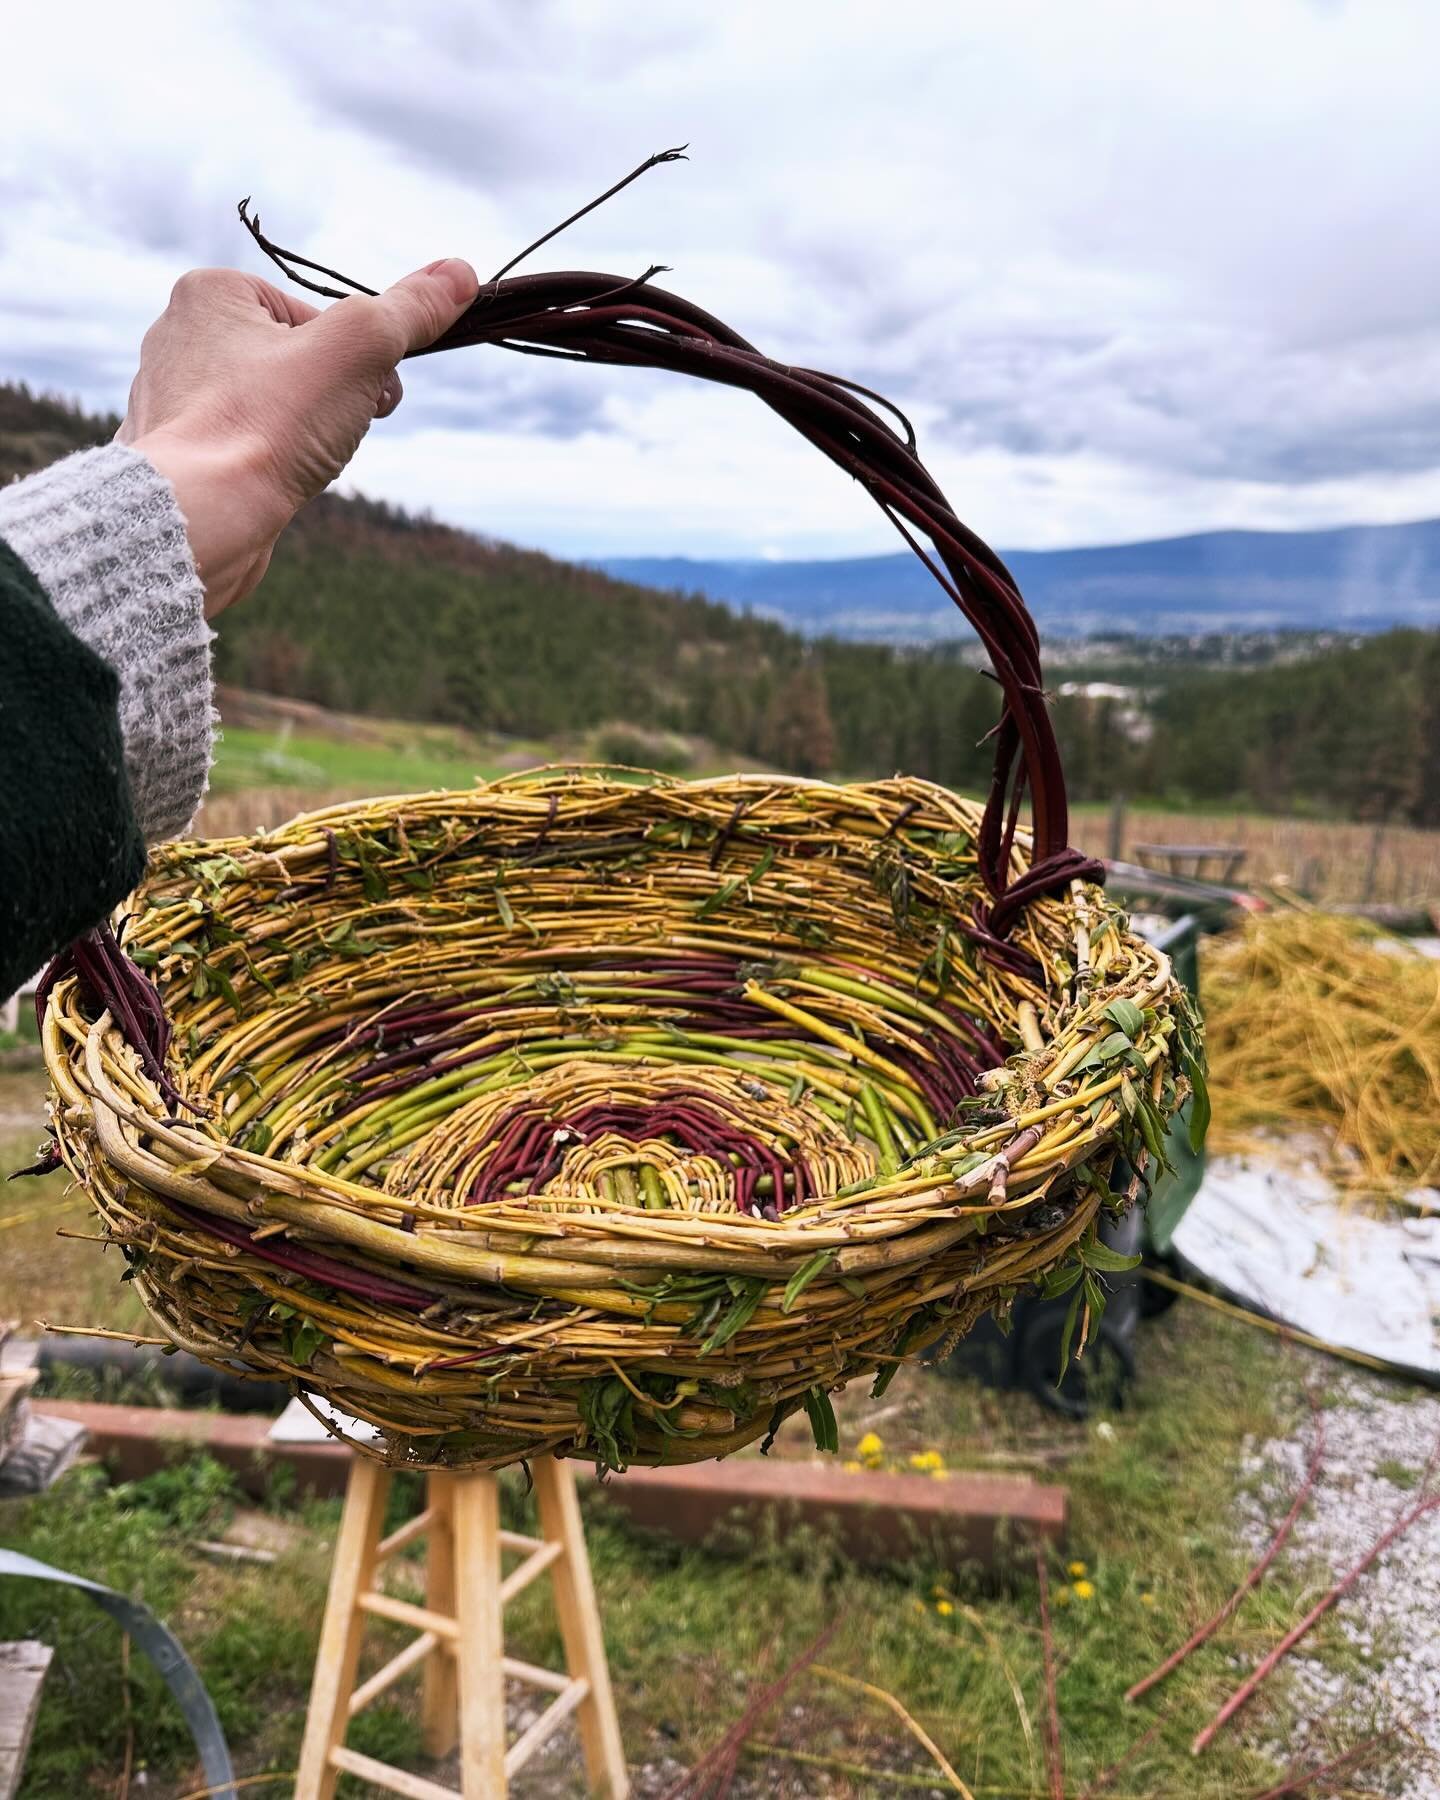 Tried something totally new this weekend! Weaving baskets! 🥰☀️ A very meditative, enjoyable and useful skill. 12/10 would recommend. Can&rsquo;t wait to make some tiny ones!! #basketweaving #earthlove #backtobasics